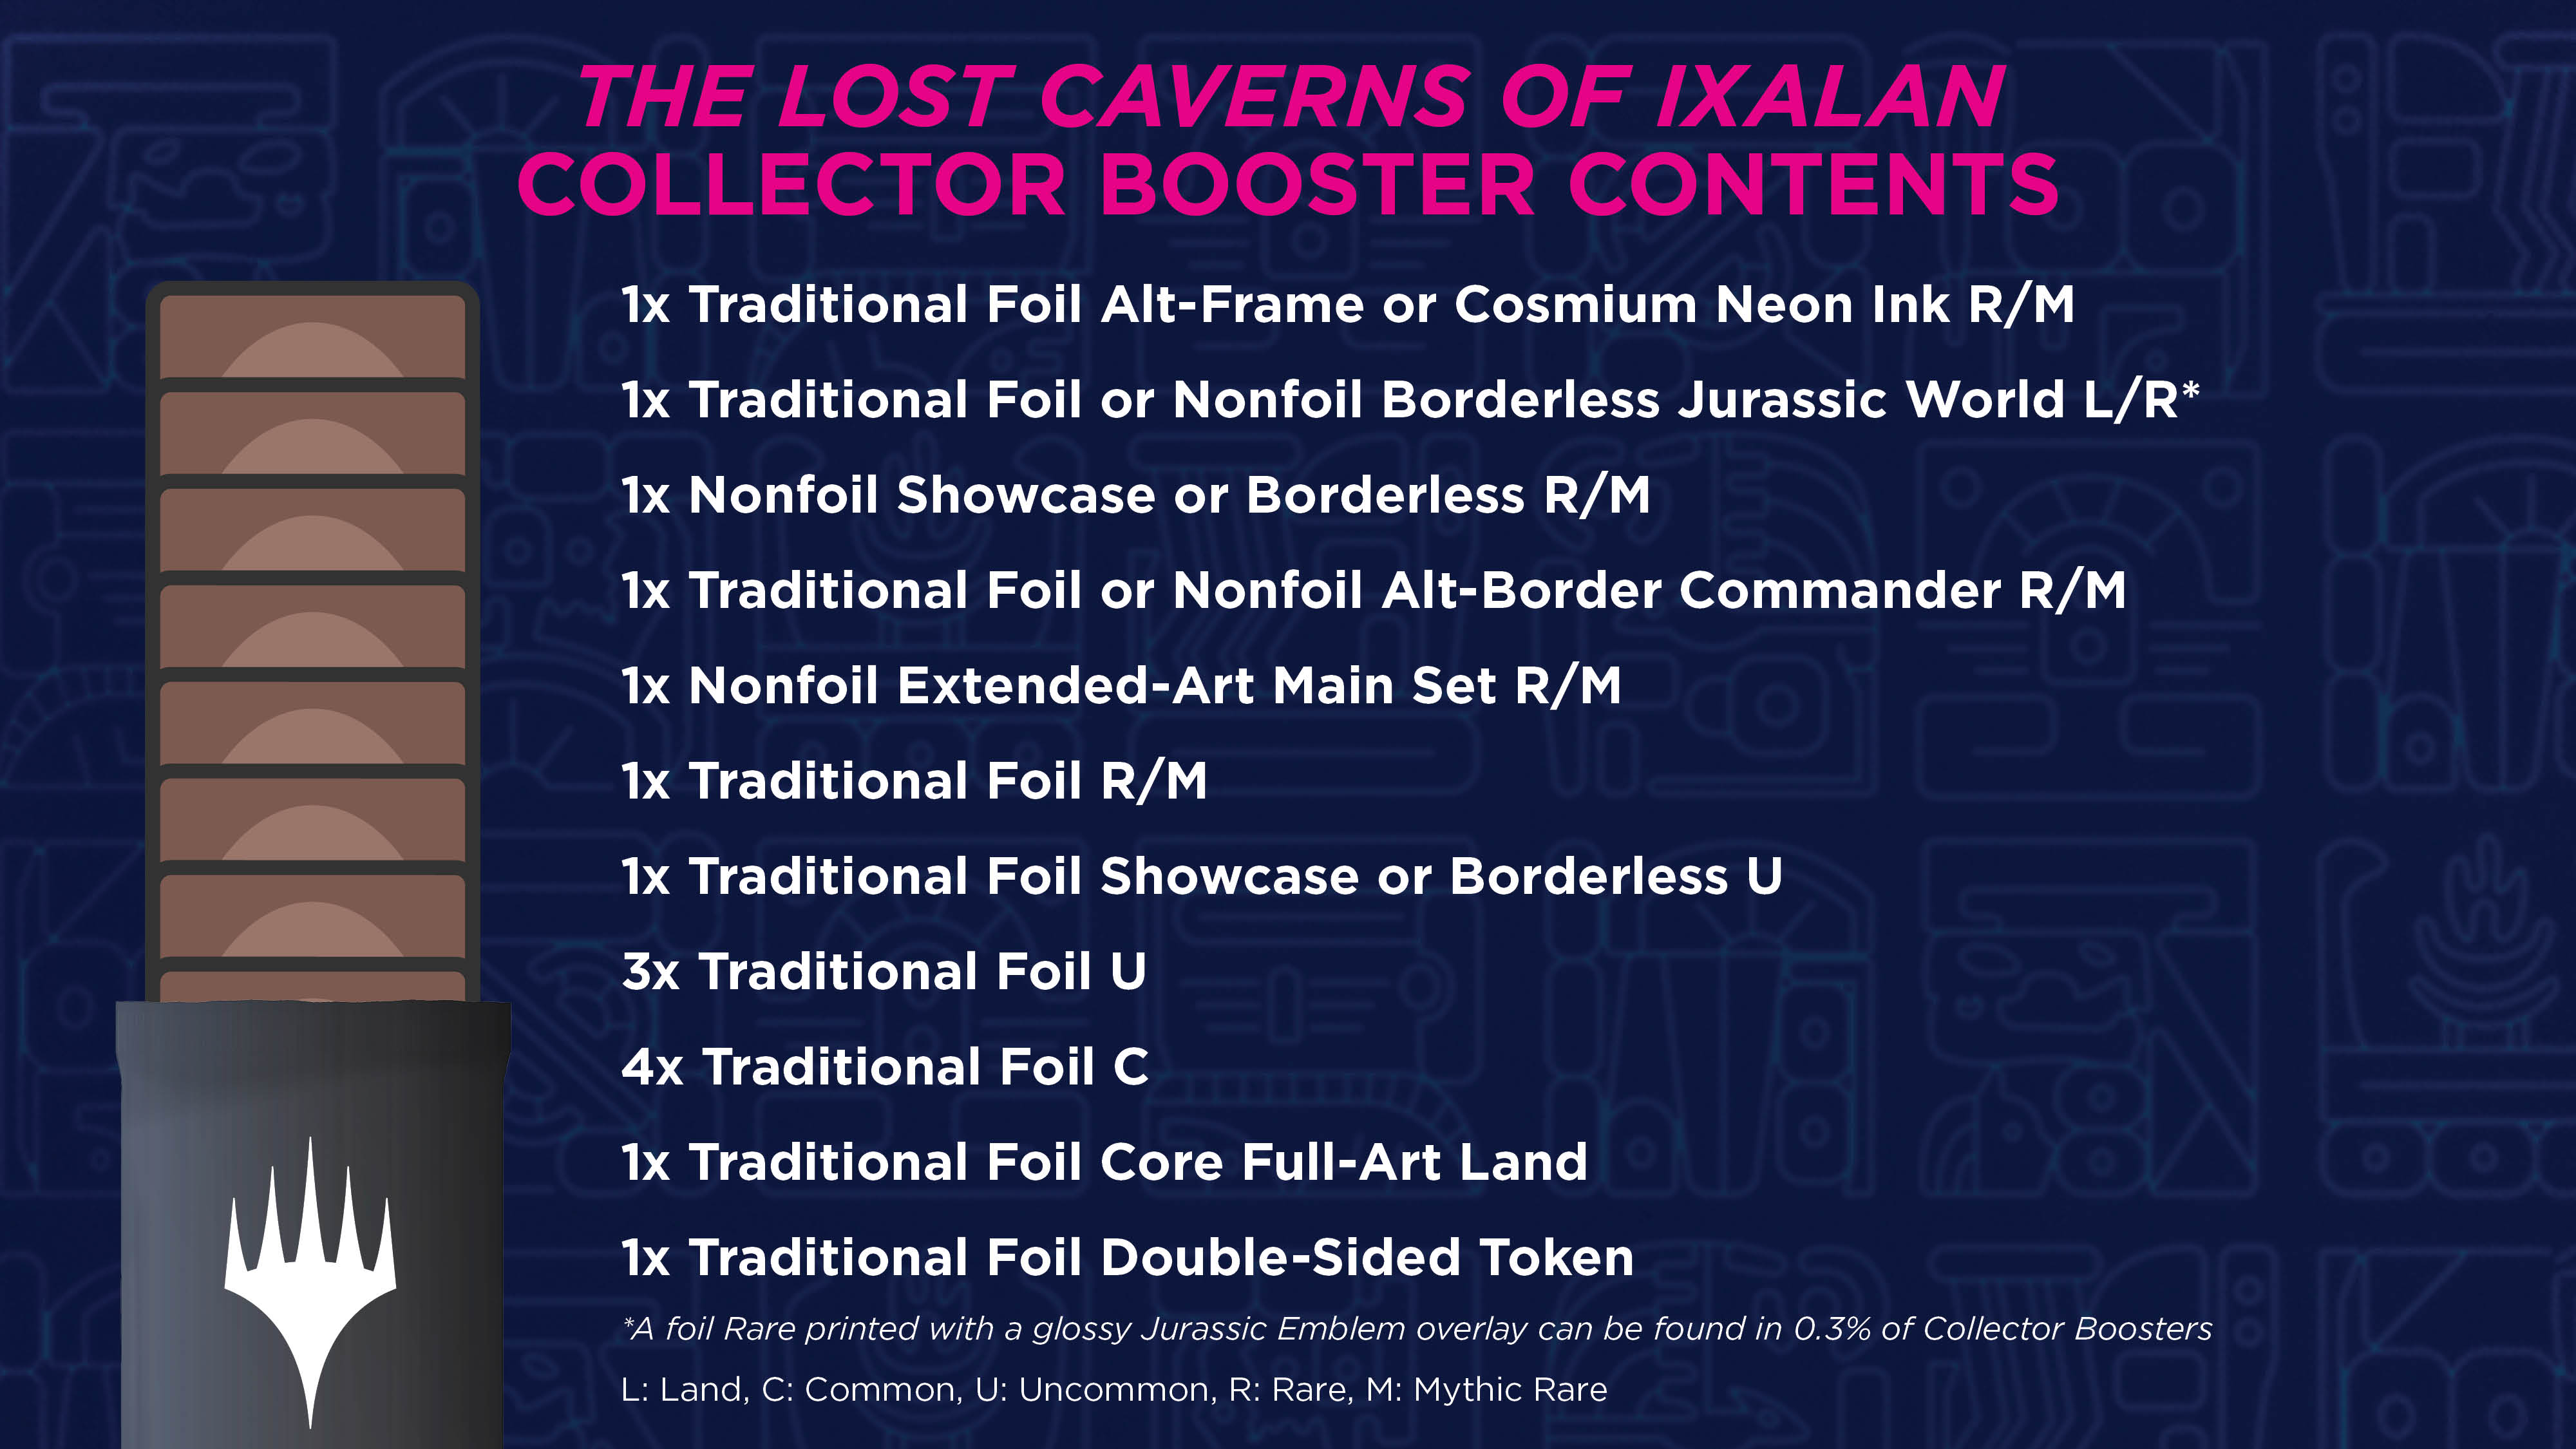 The Lost Caverns of Ixalan Collector Booster Breakdown